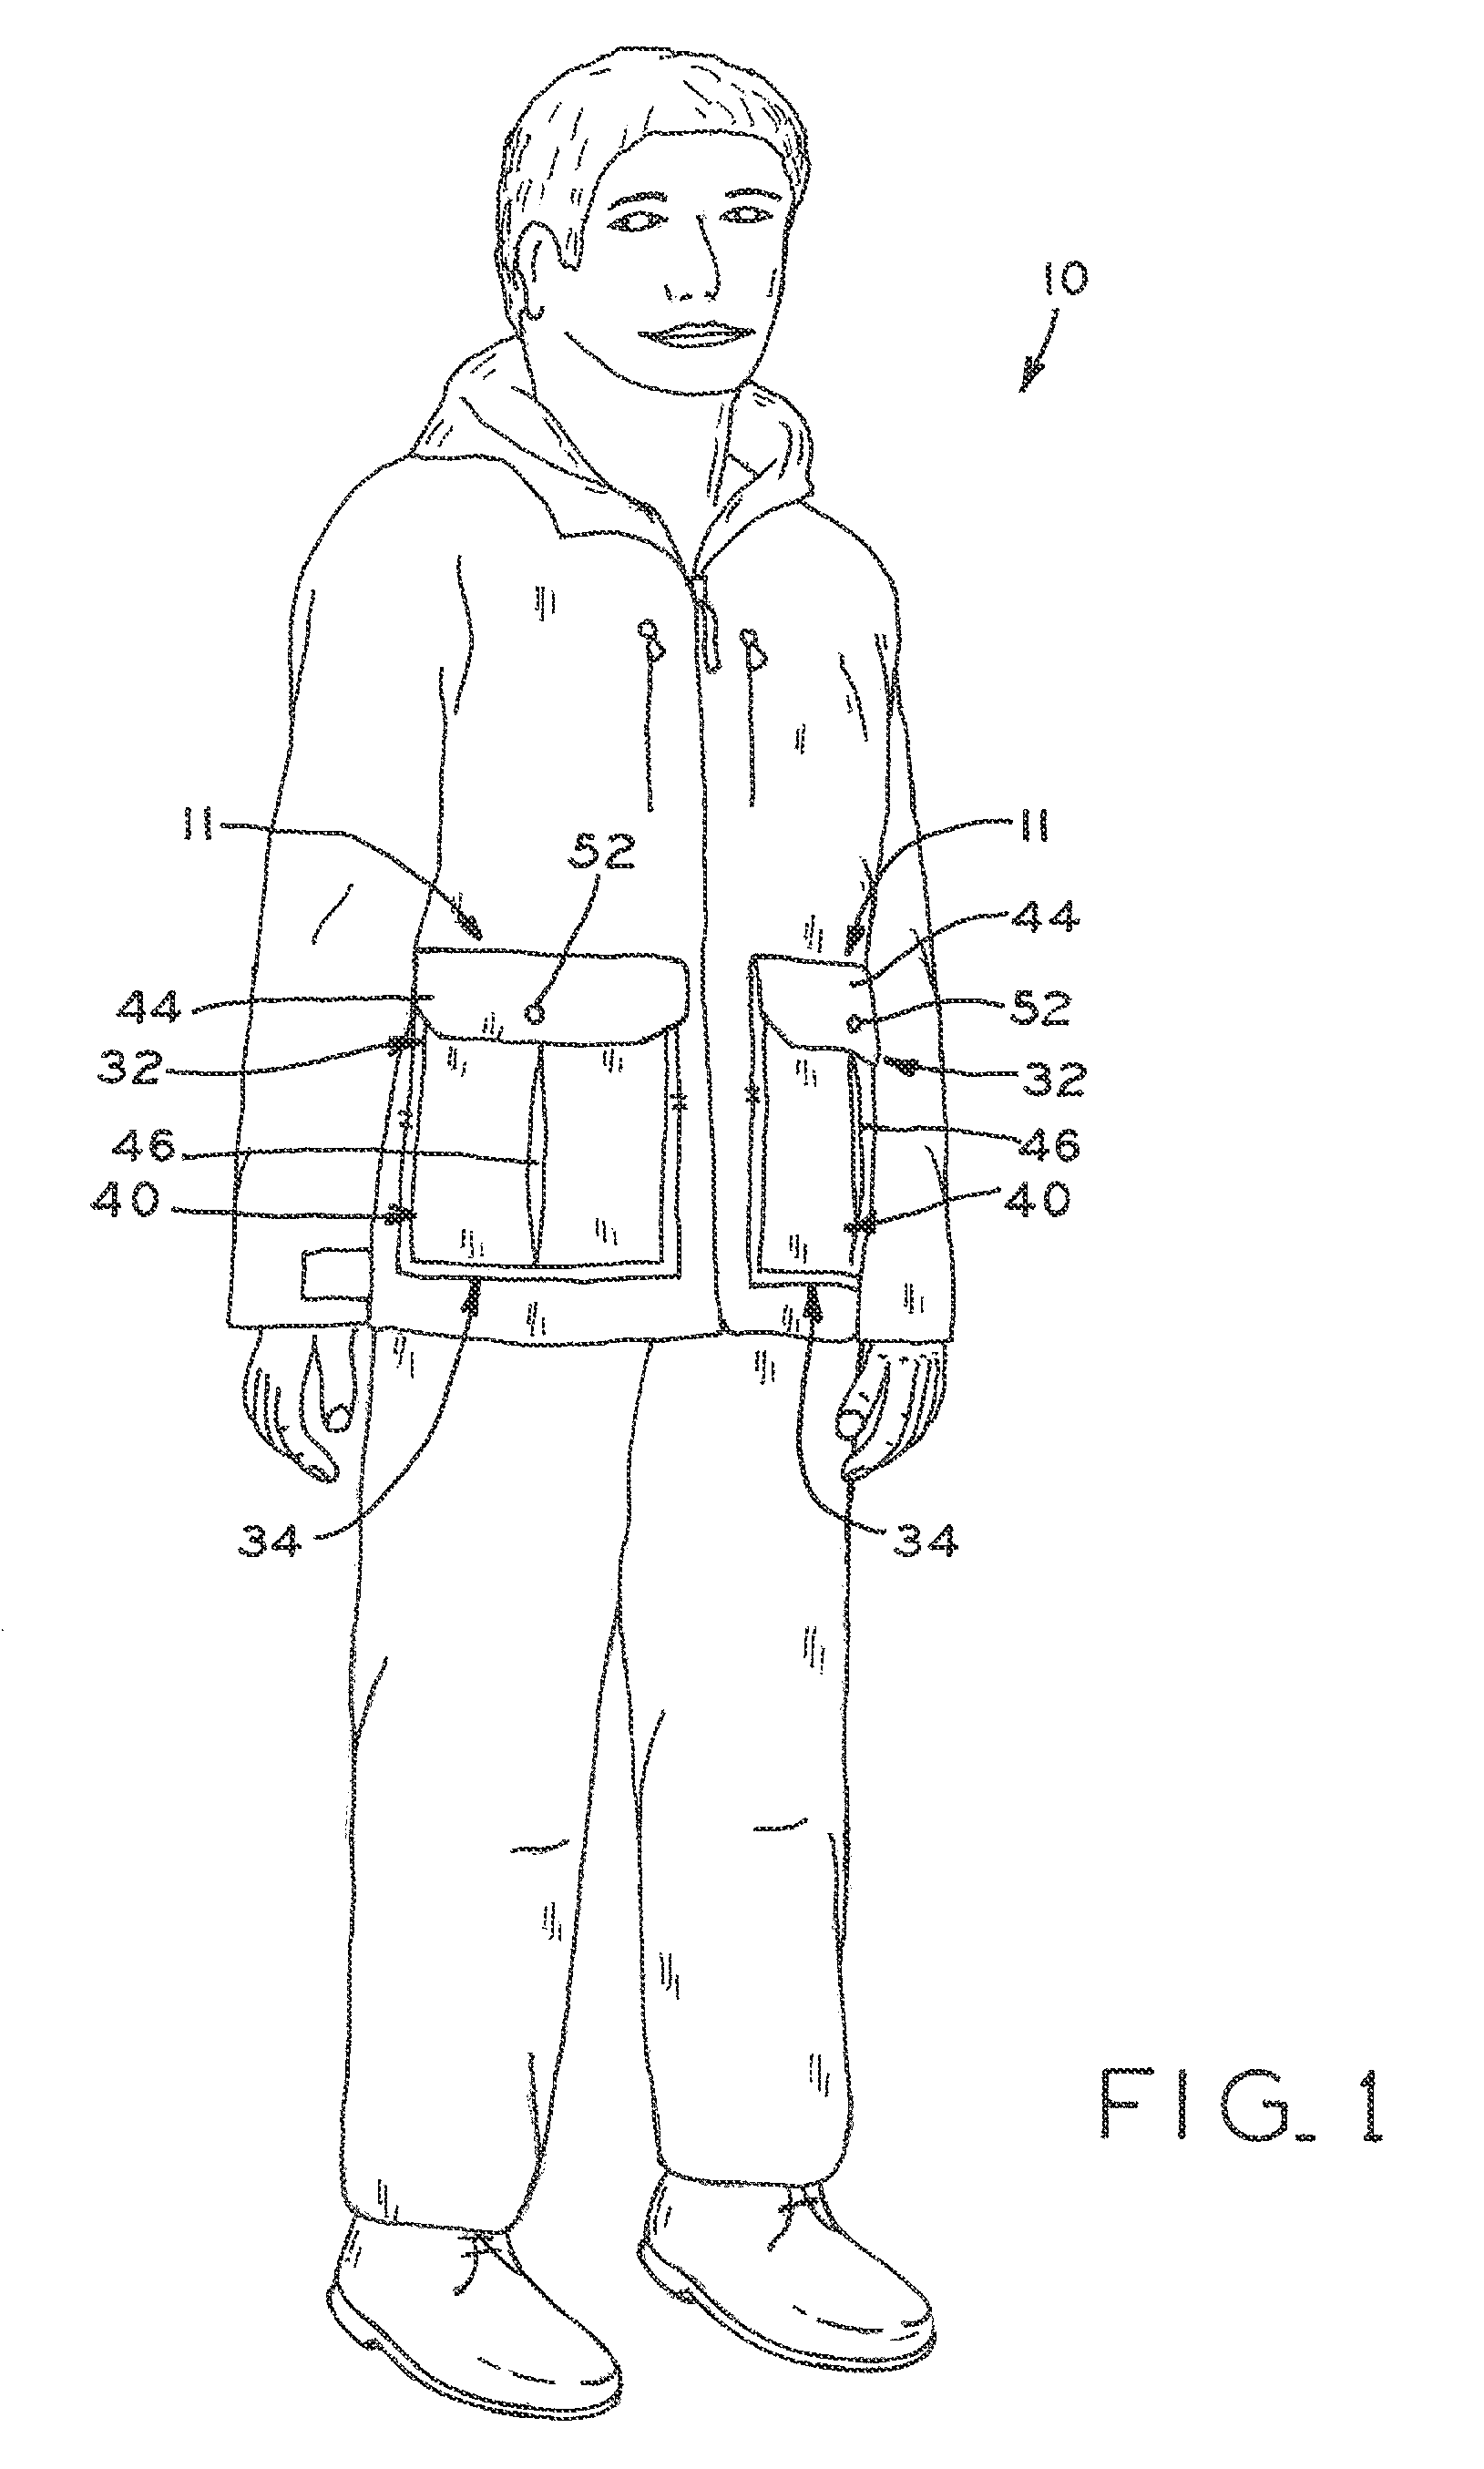 Article of apparel including concealed weapon pocket